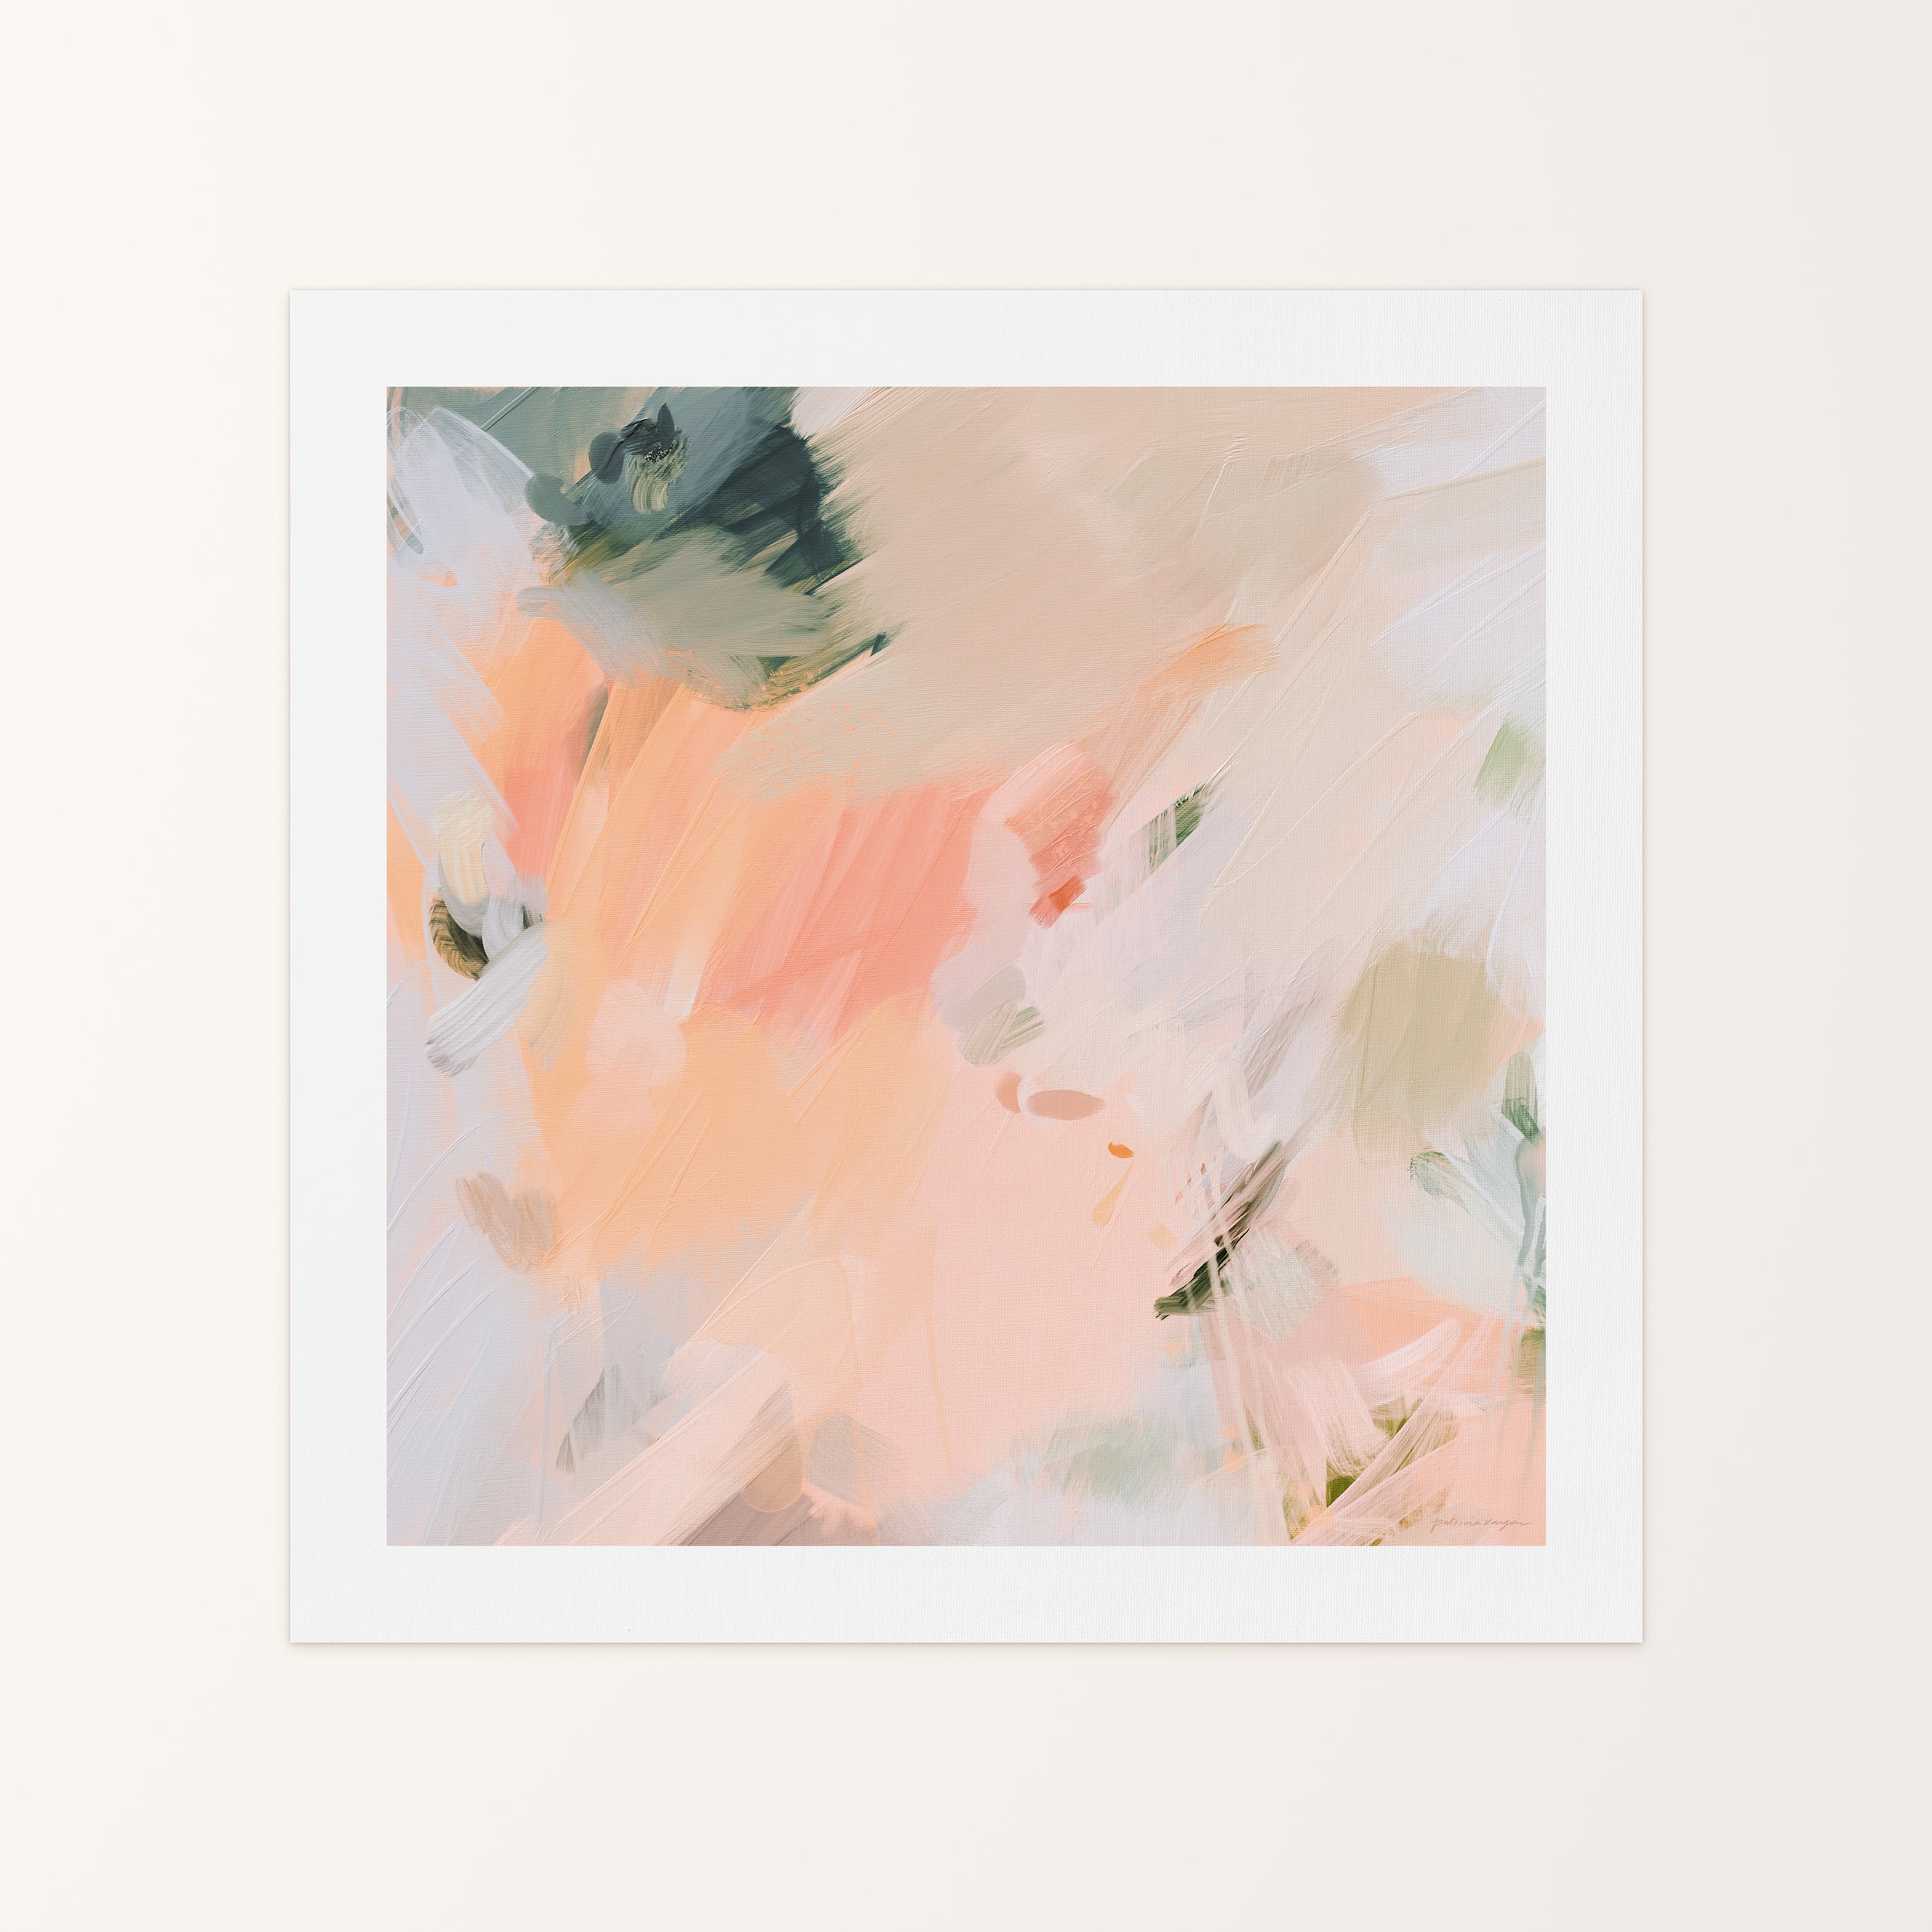 Merle, soft pink and green colorful abstract canvas wall art print by Parima Studio